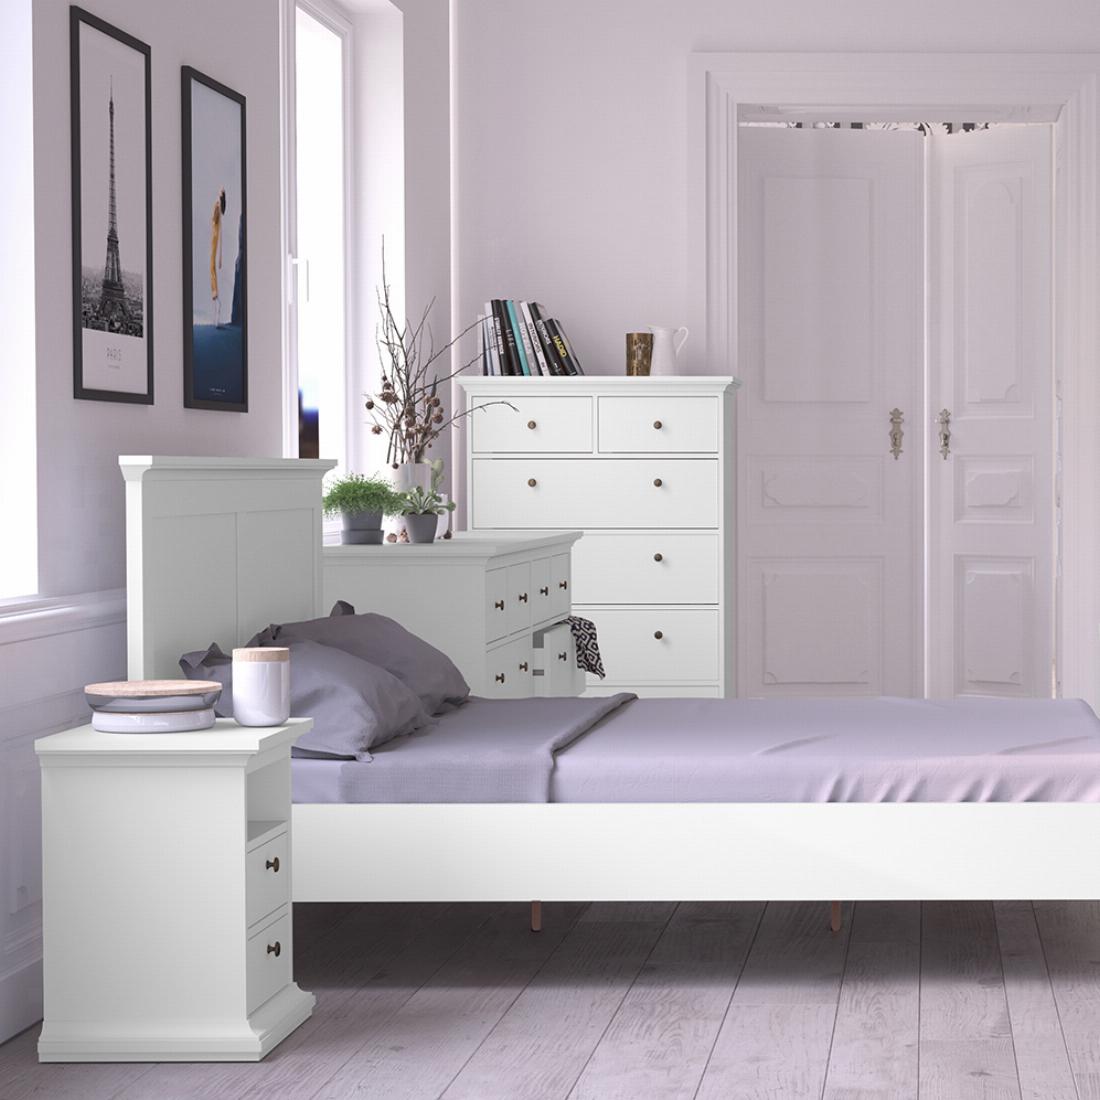 Paris Chest of 6 Drawers in White